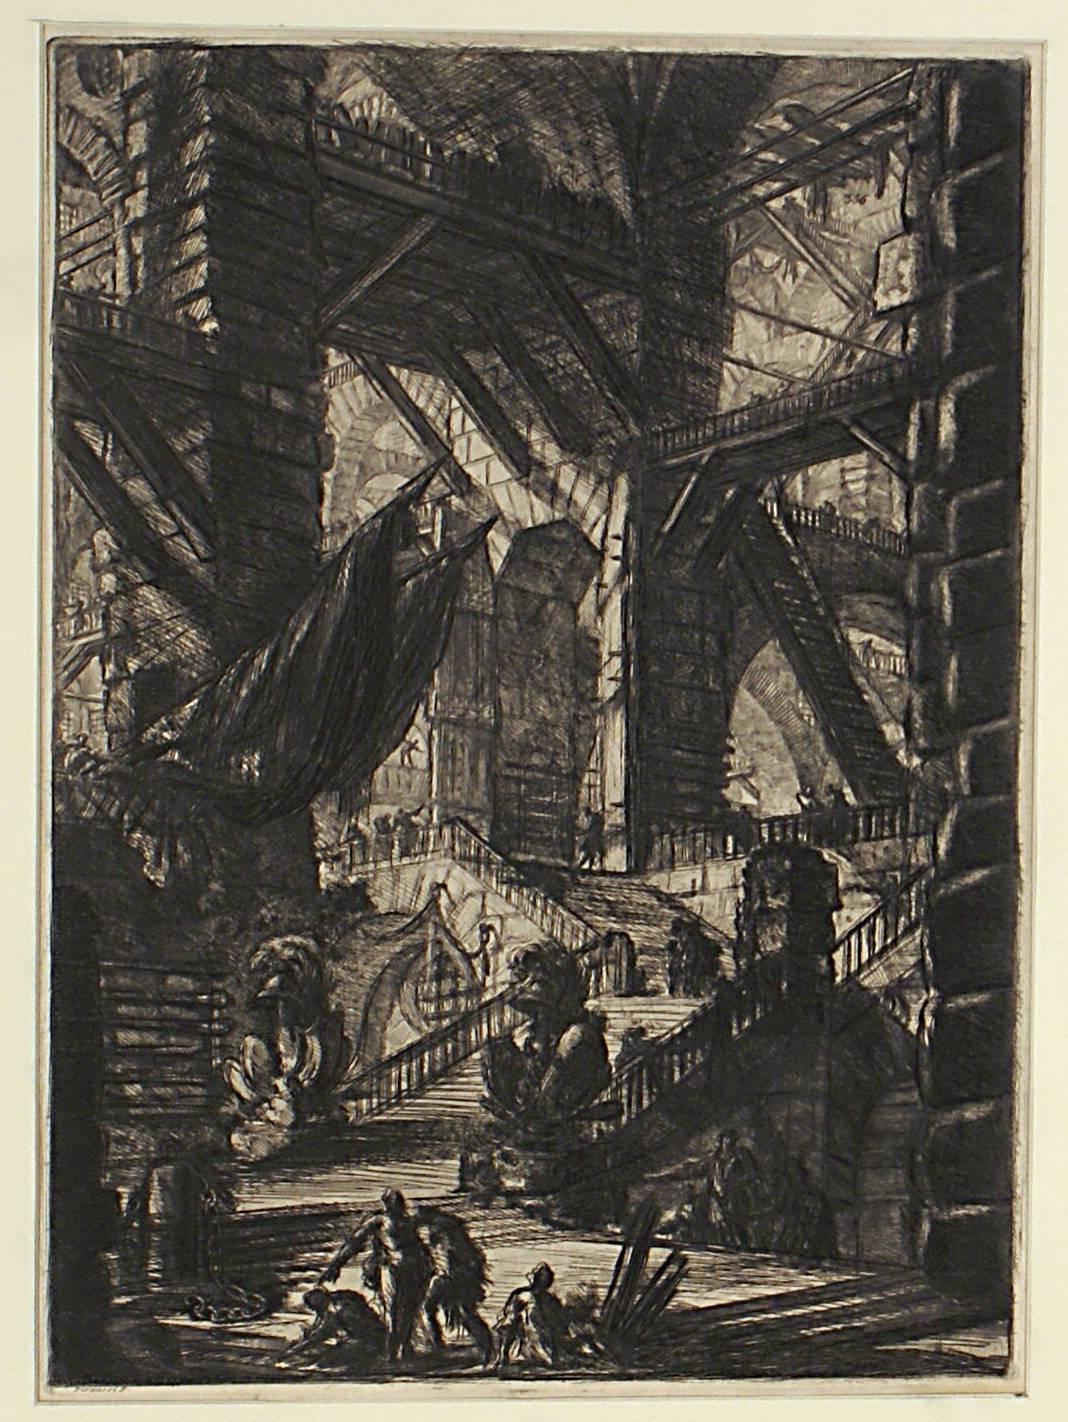 The "Carceri" or "Imaginary Prisons" series of engravings was first published around 1750. During Piranesi's lifetime collectors preferred his views of Rome. The plates for Imaginary Prisons were not popular, but today prints